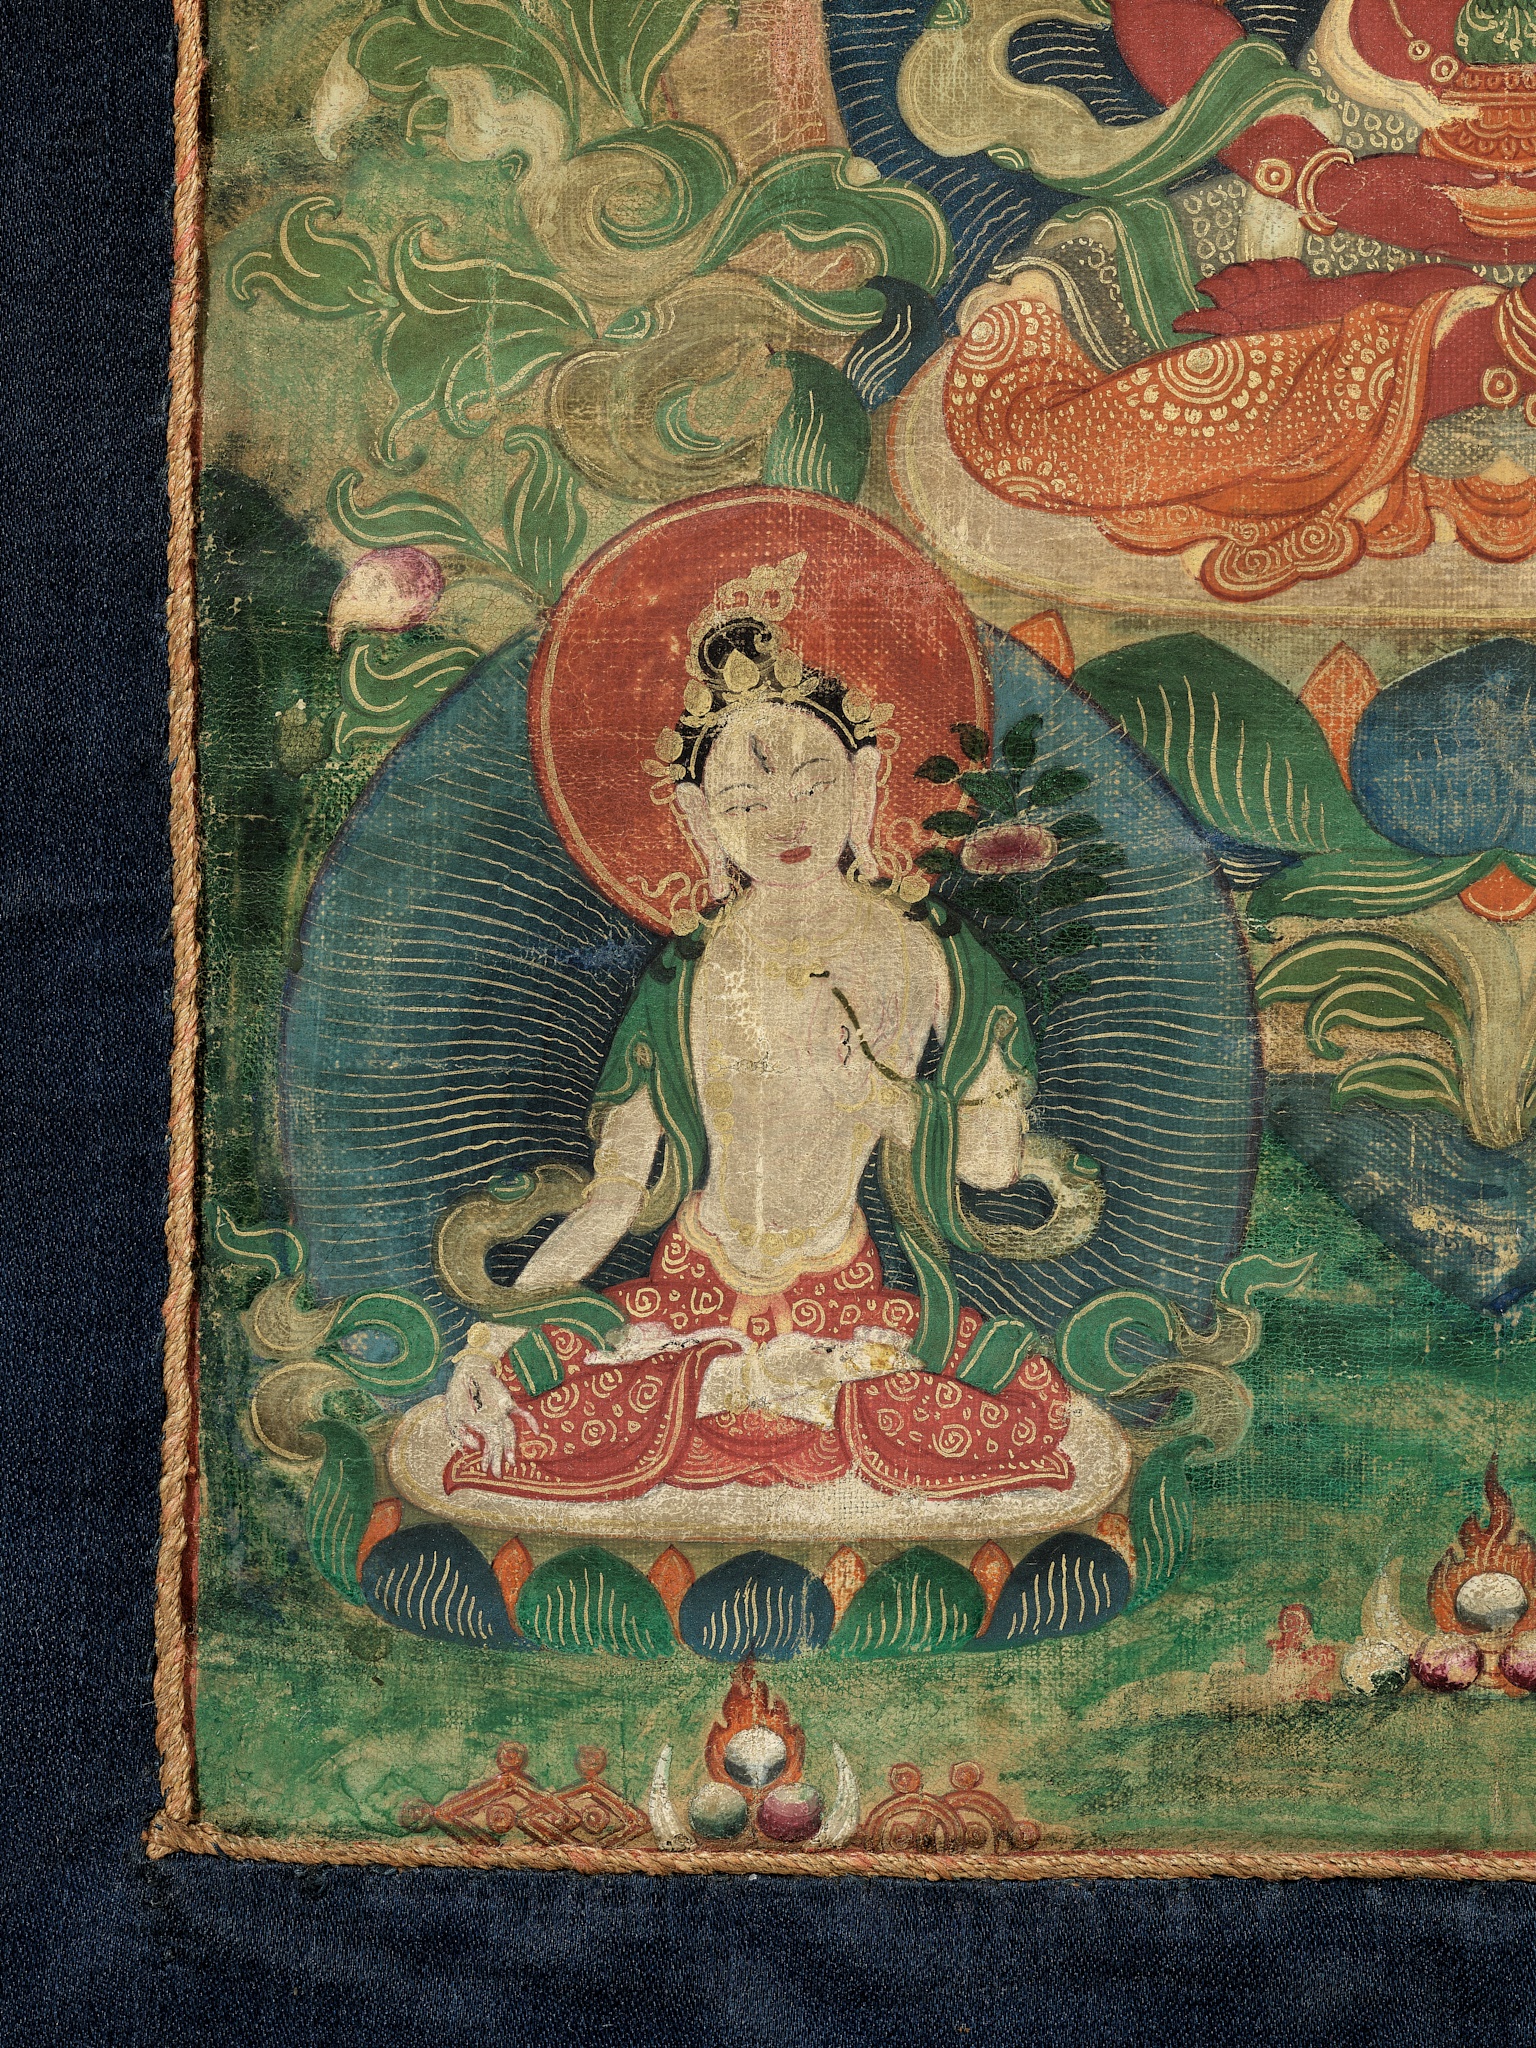 A THANGKA OF RED AMITAYUS, TIBET, 18TH CENTURY - Image 7 of 10